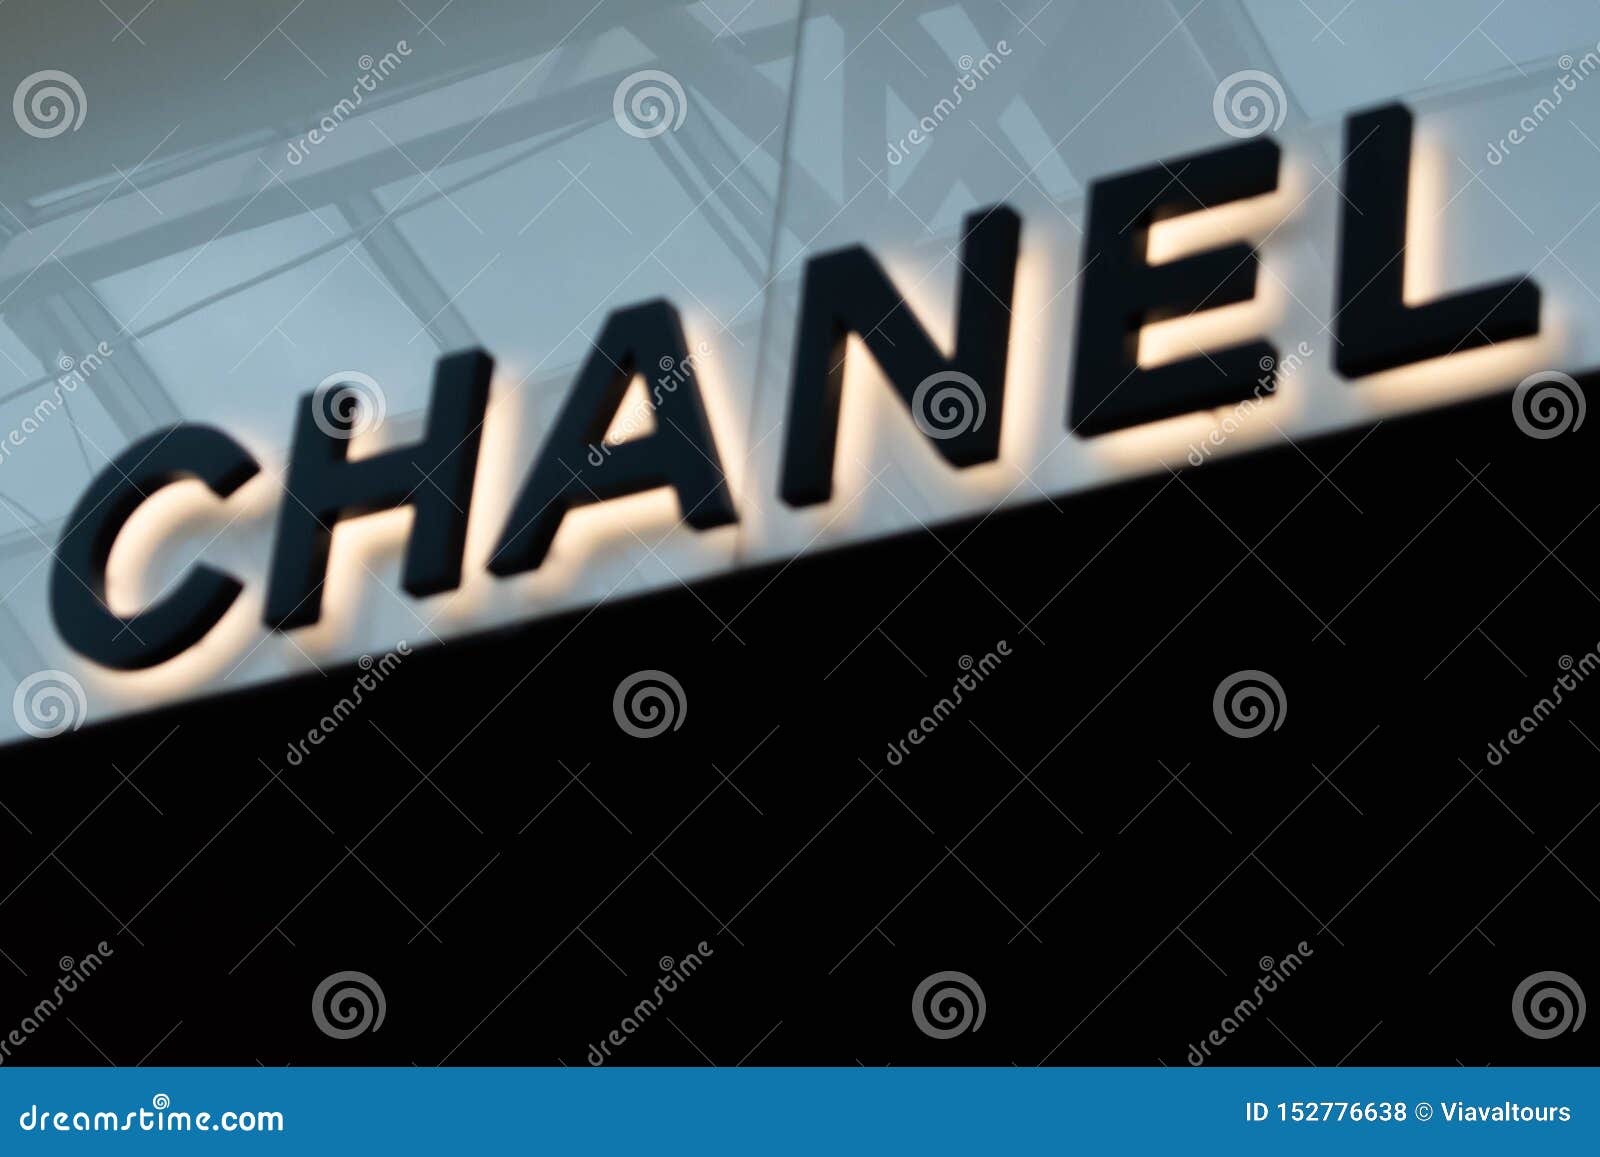 Visit Chanel at the Mall at Millenia in Orlando Florida